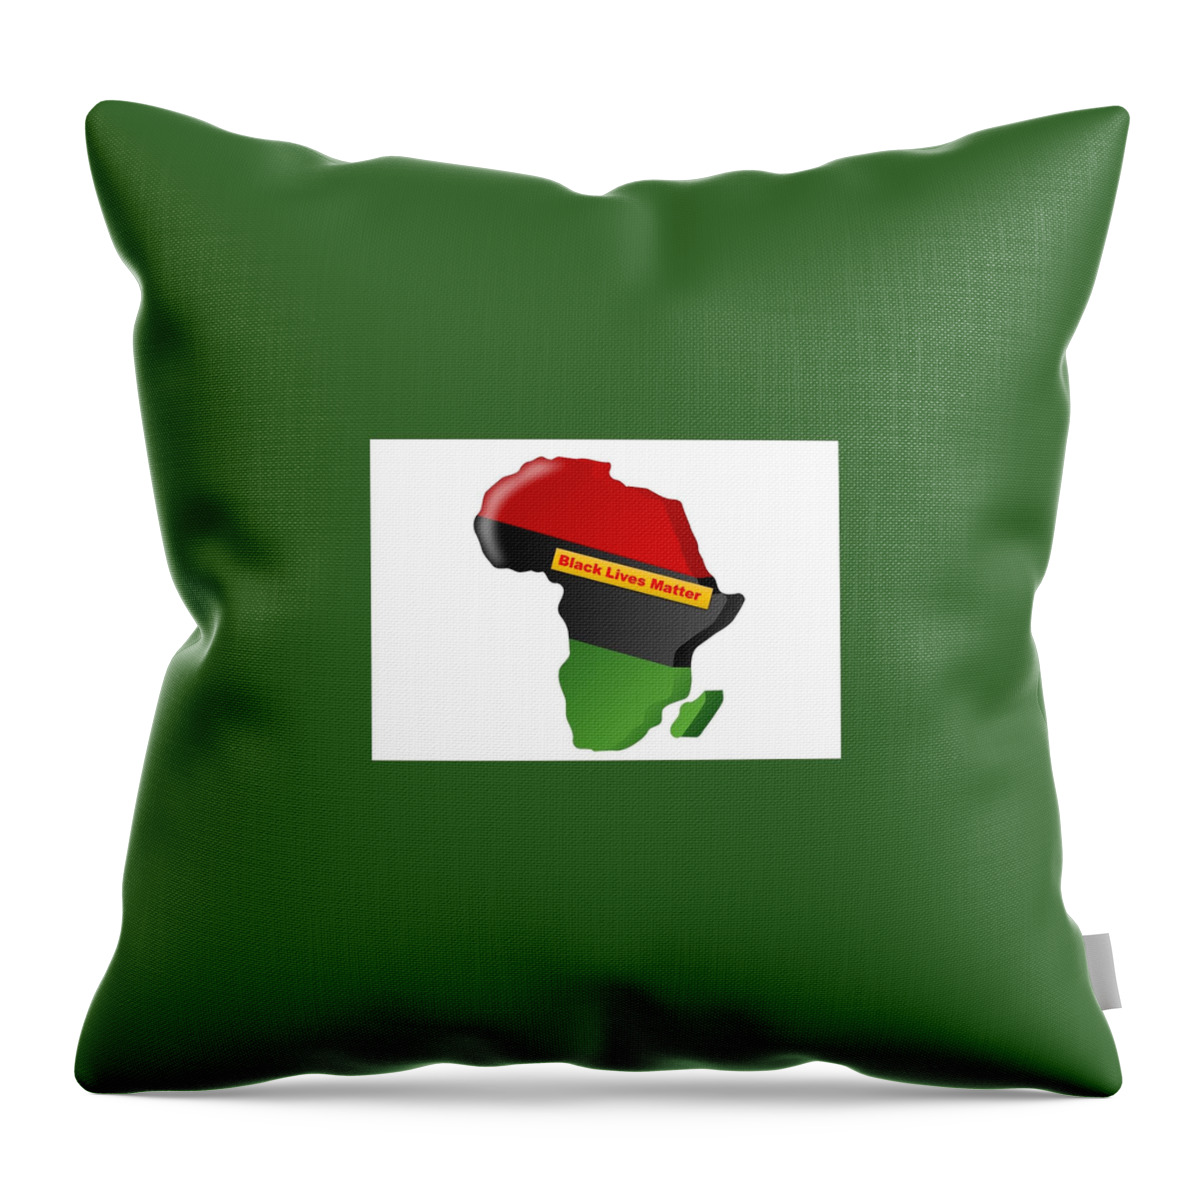 Blm Throw Pillow featuring the mixed media Black Lives Matter Africa Image by Nancy Ayanna Wyatt